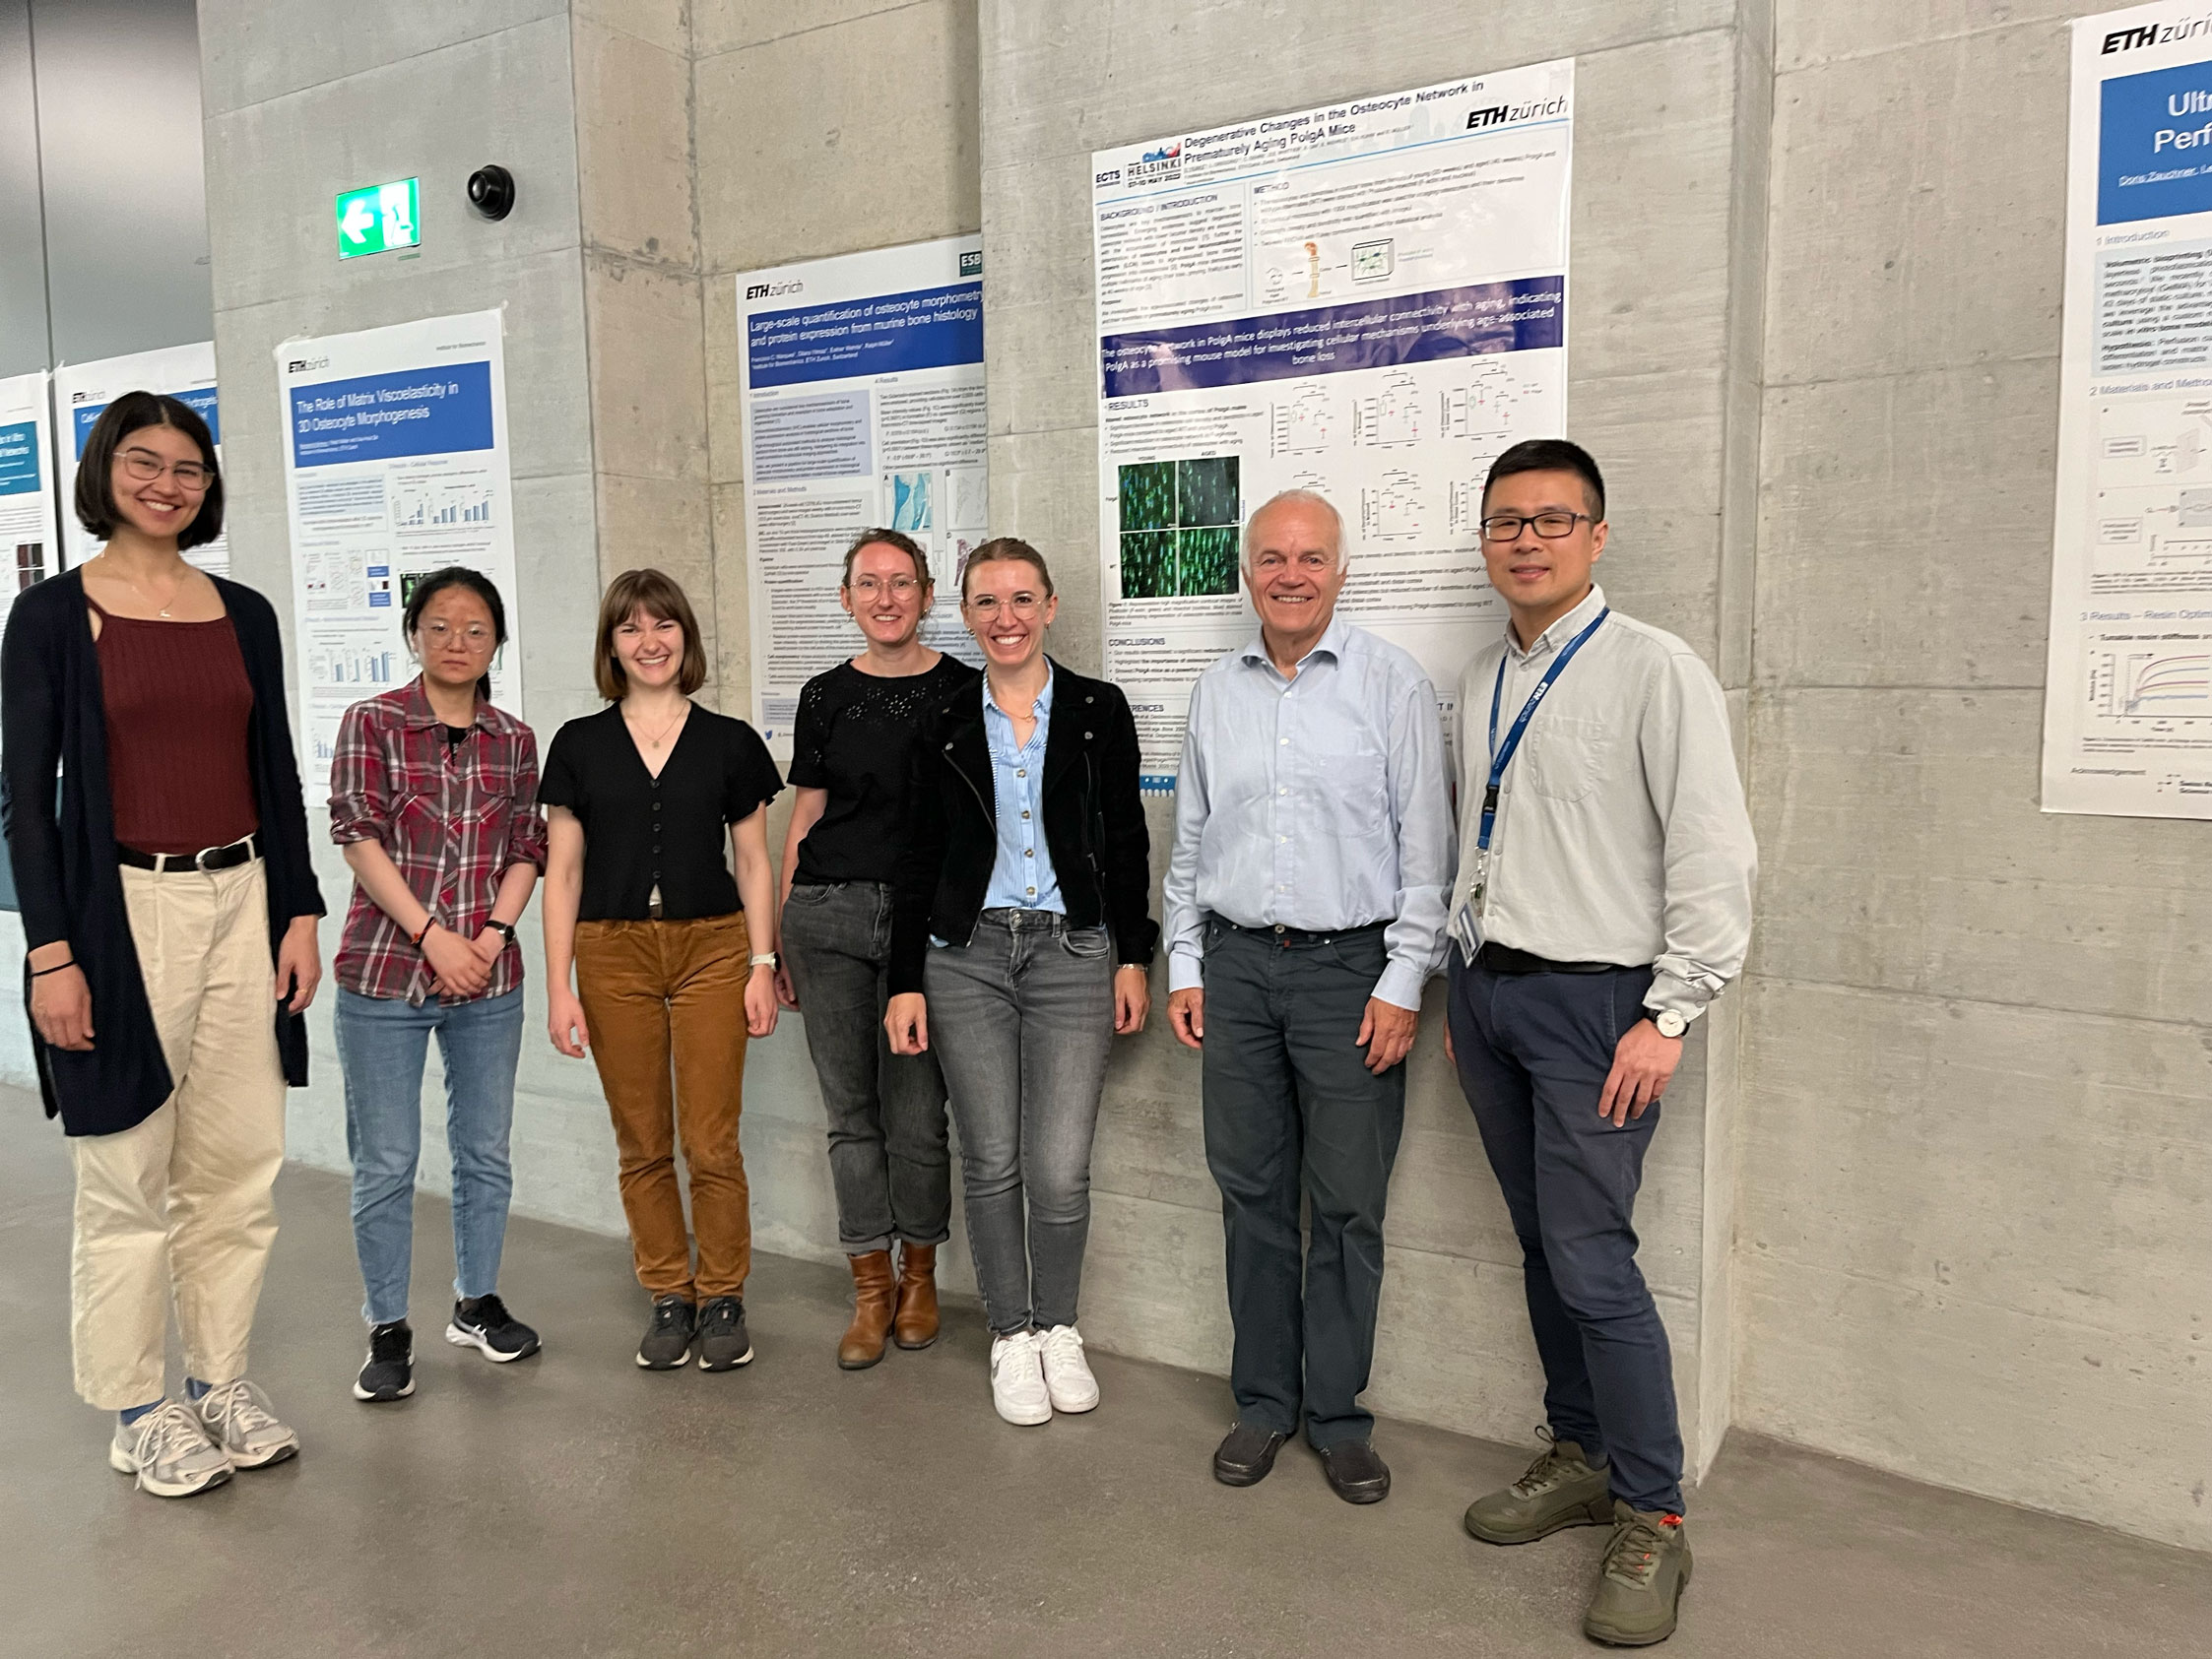 2024 May 27 The BME had fruitful exchange with a world-known pioneer in tissue engineering - Professor Heinz Redl (Ludwig Boltzmann Inst.) during his stay at ETH Zurich!